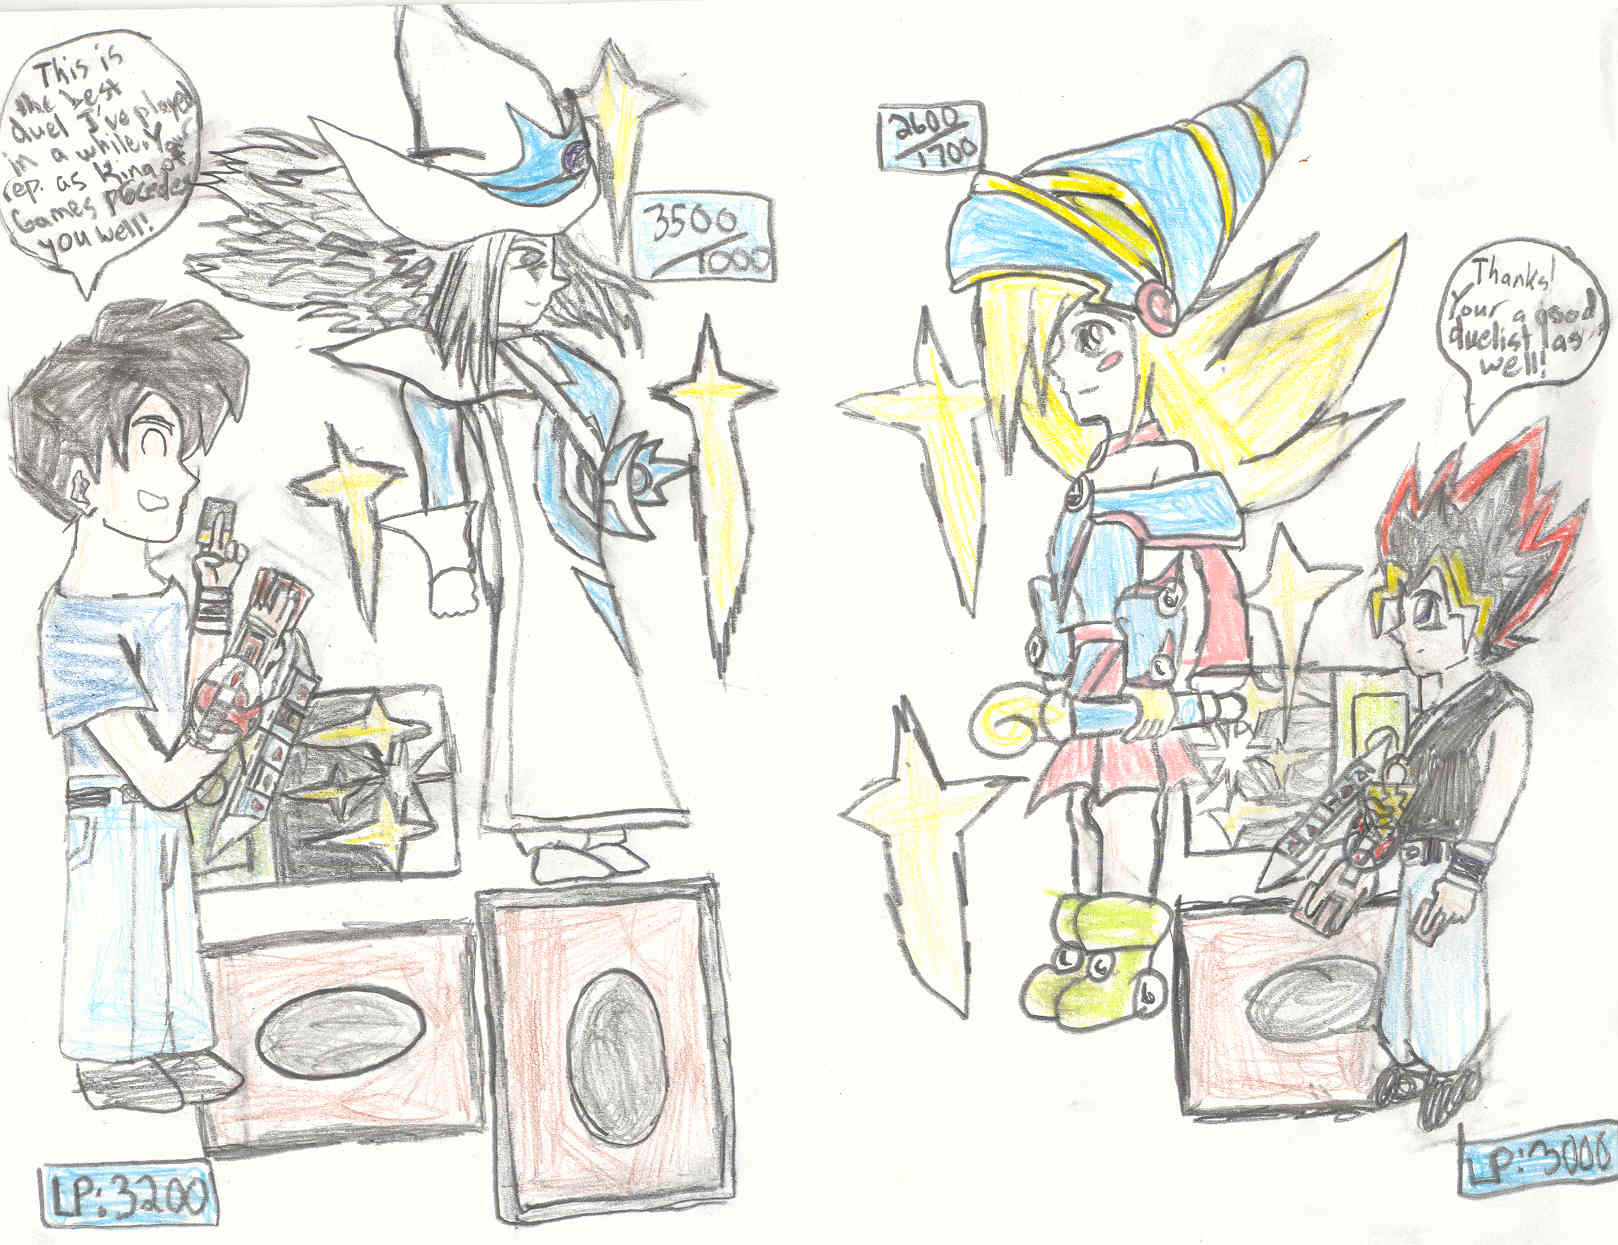 Duelists of greatness; Tyler Vs. Yugi by MageKnight007